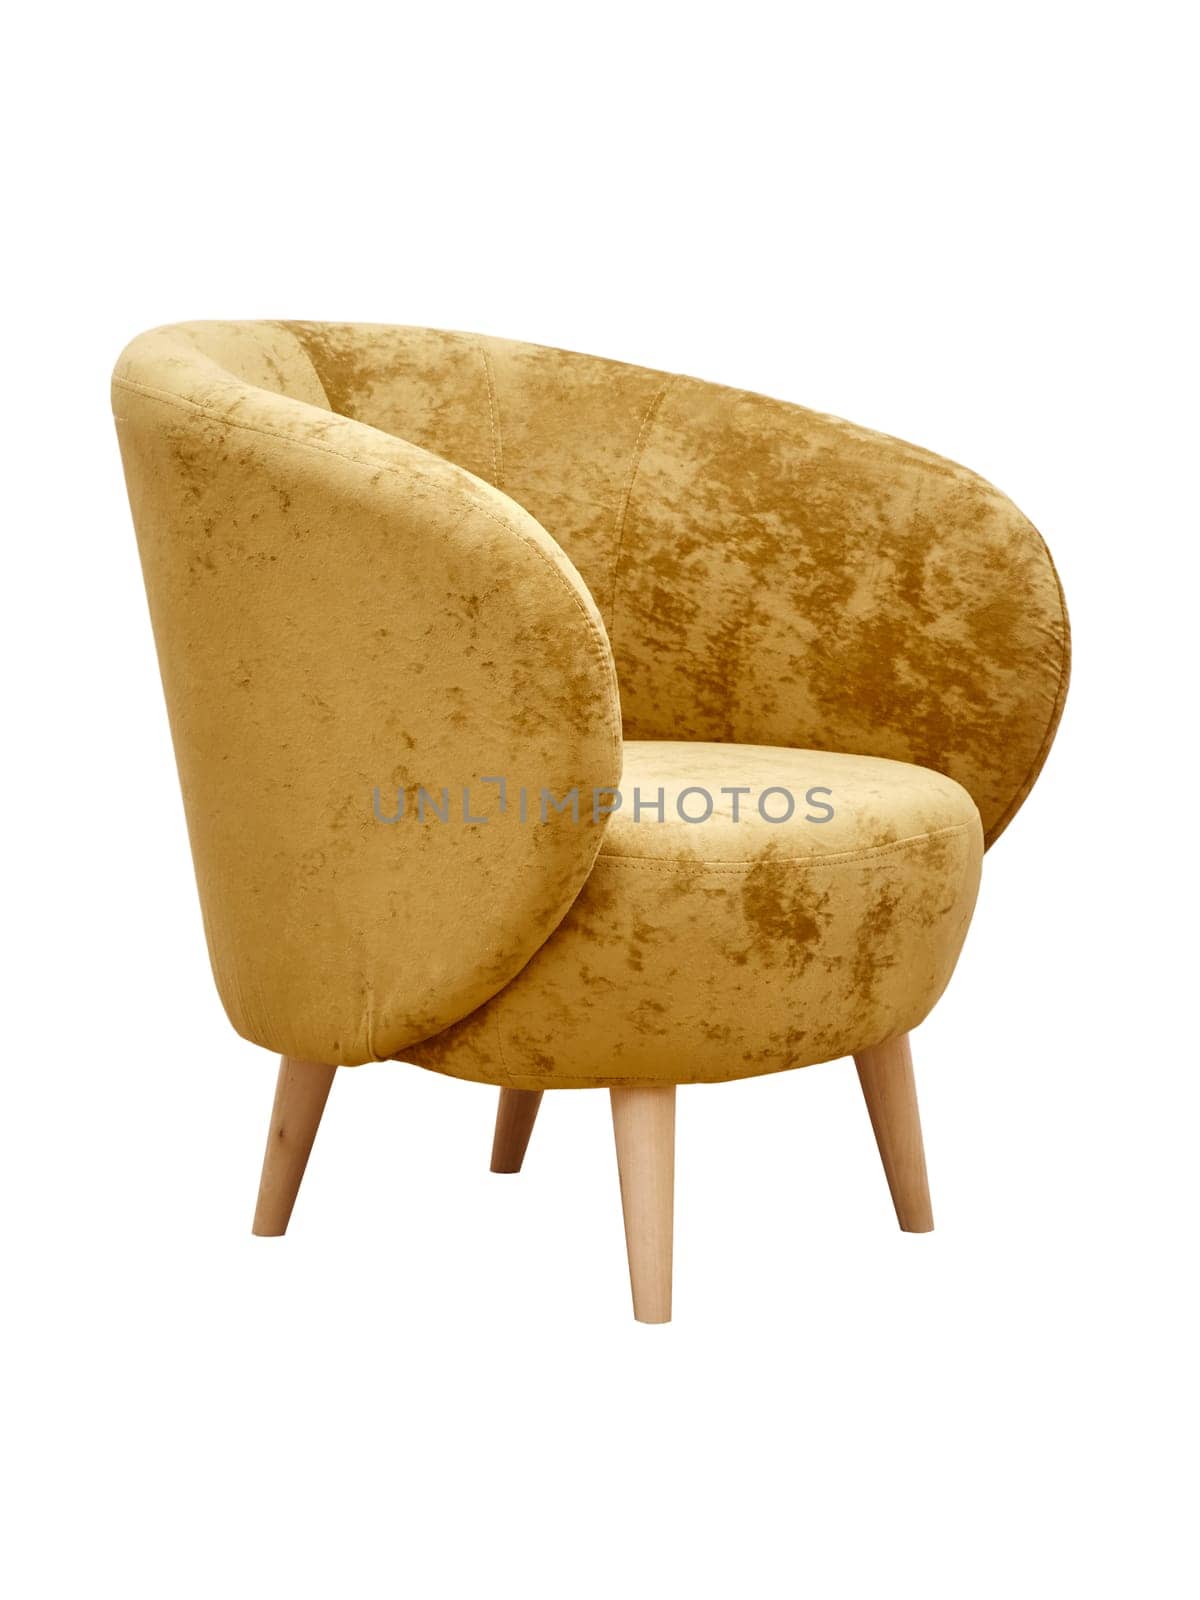 Modern yellow fabric armchair with wooden legs isolated on white background, side view. furniture, interior, home design in minimal style